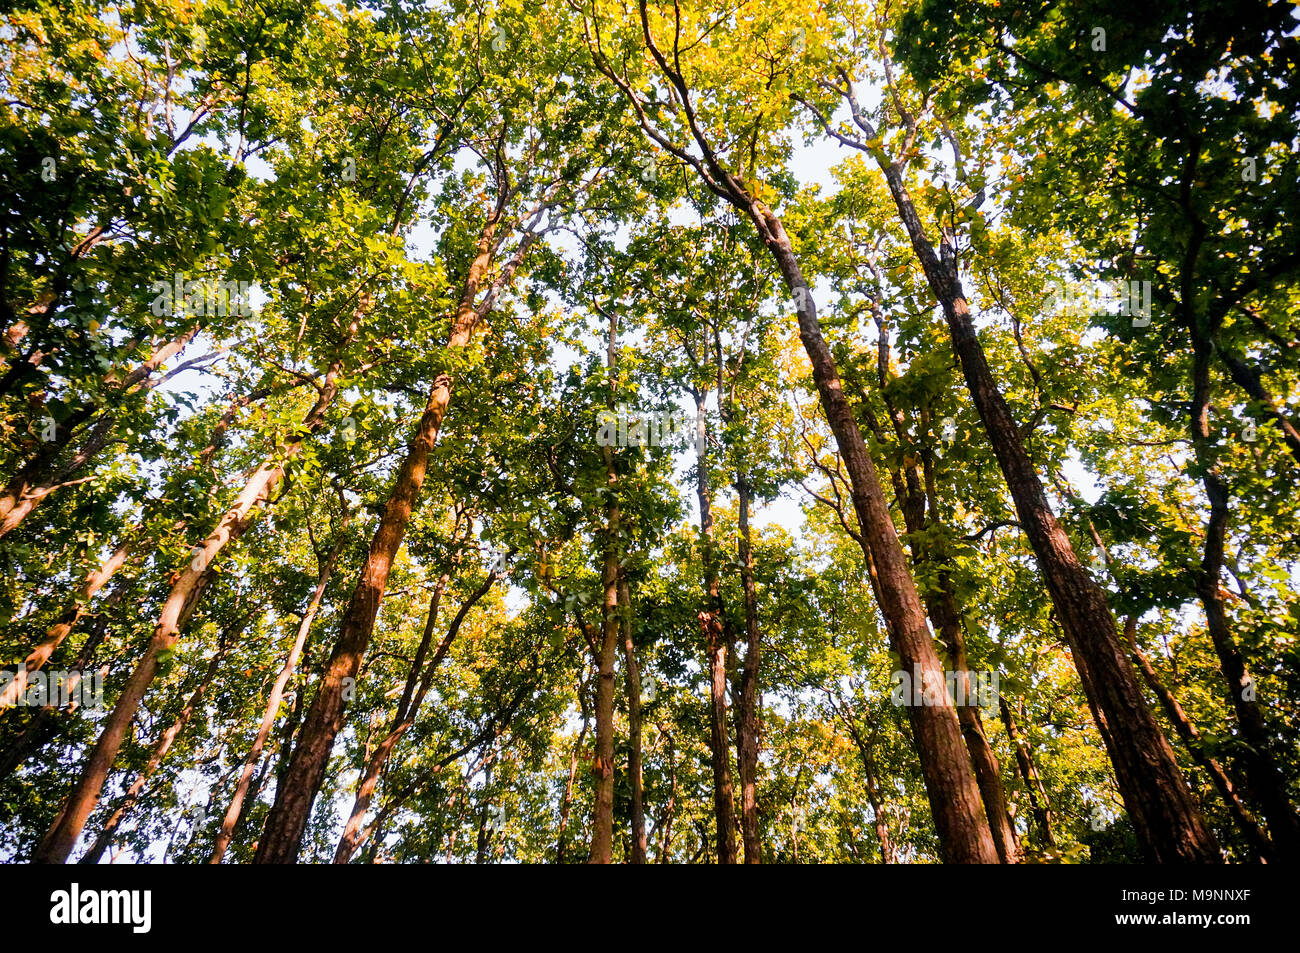 Upward shot of thin trunked trees with a green canopy and dense foliage. A perfect shot for nature, green, conservation, forest, eco system and habitat Stock Photo